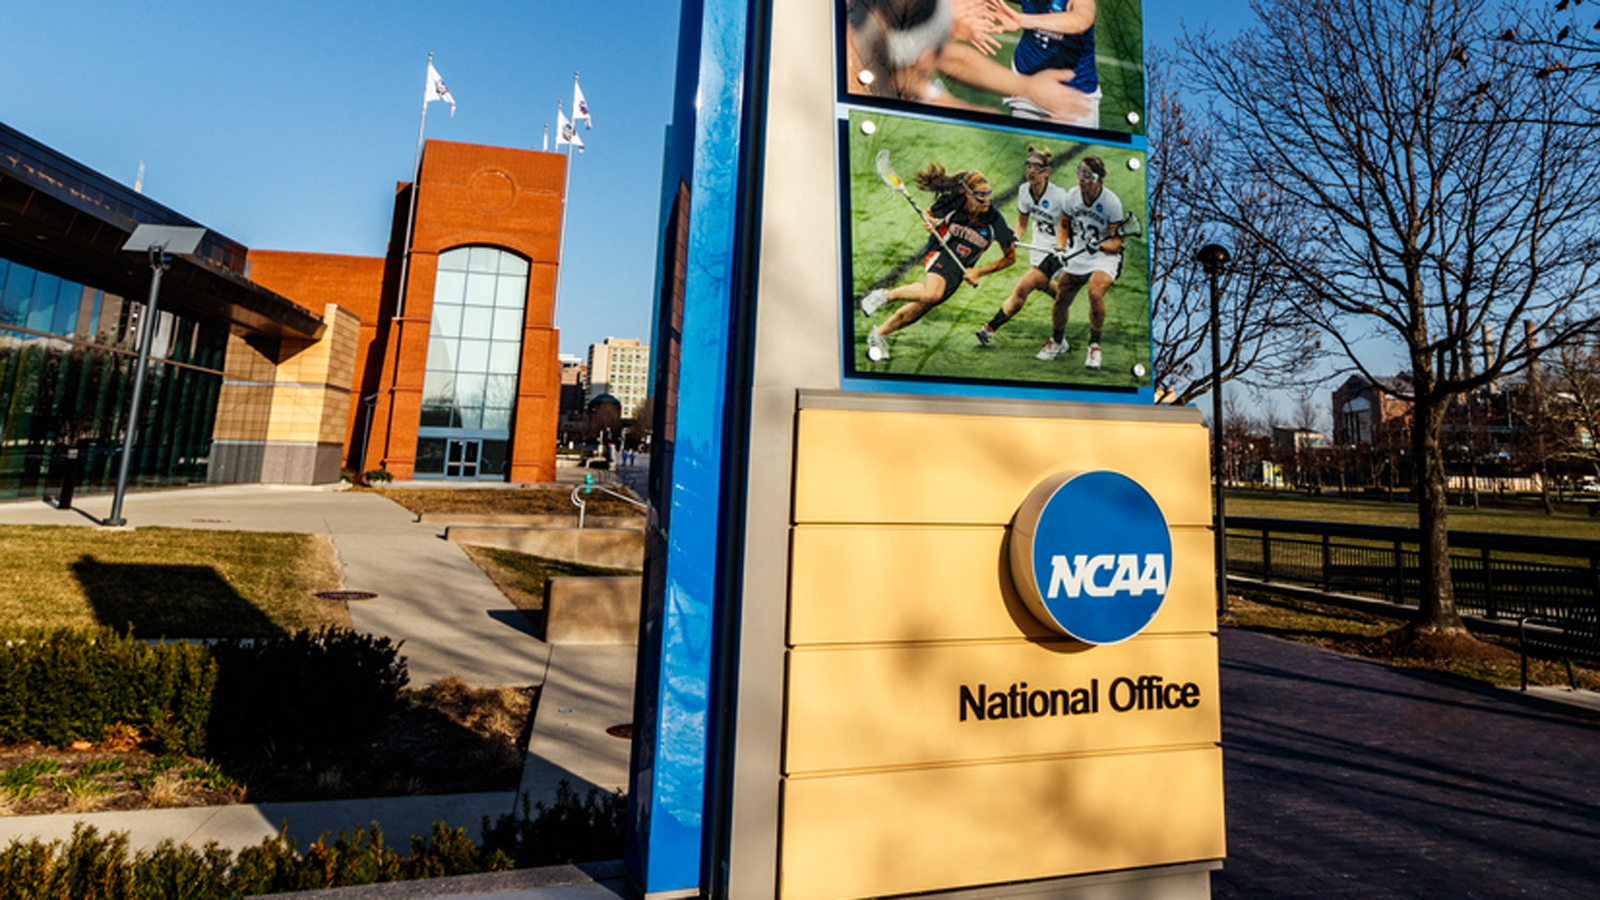 NCAA, Power 5 Conferences Say $4B NIL Class Action Lawsuit Could Be Their 'Death Knell'